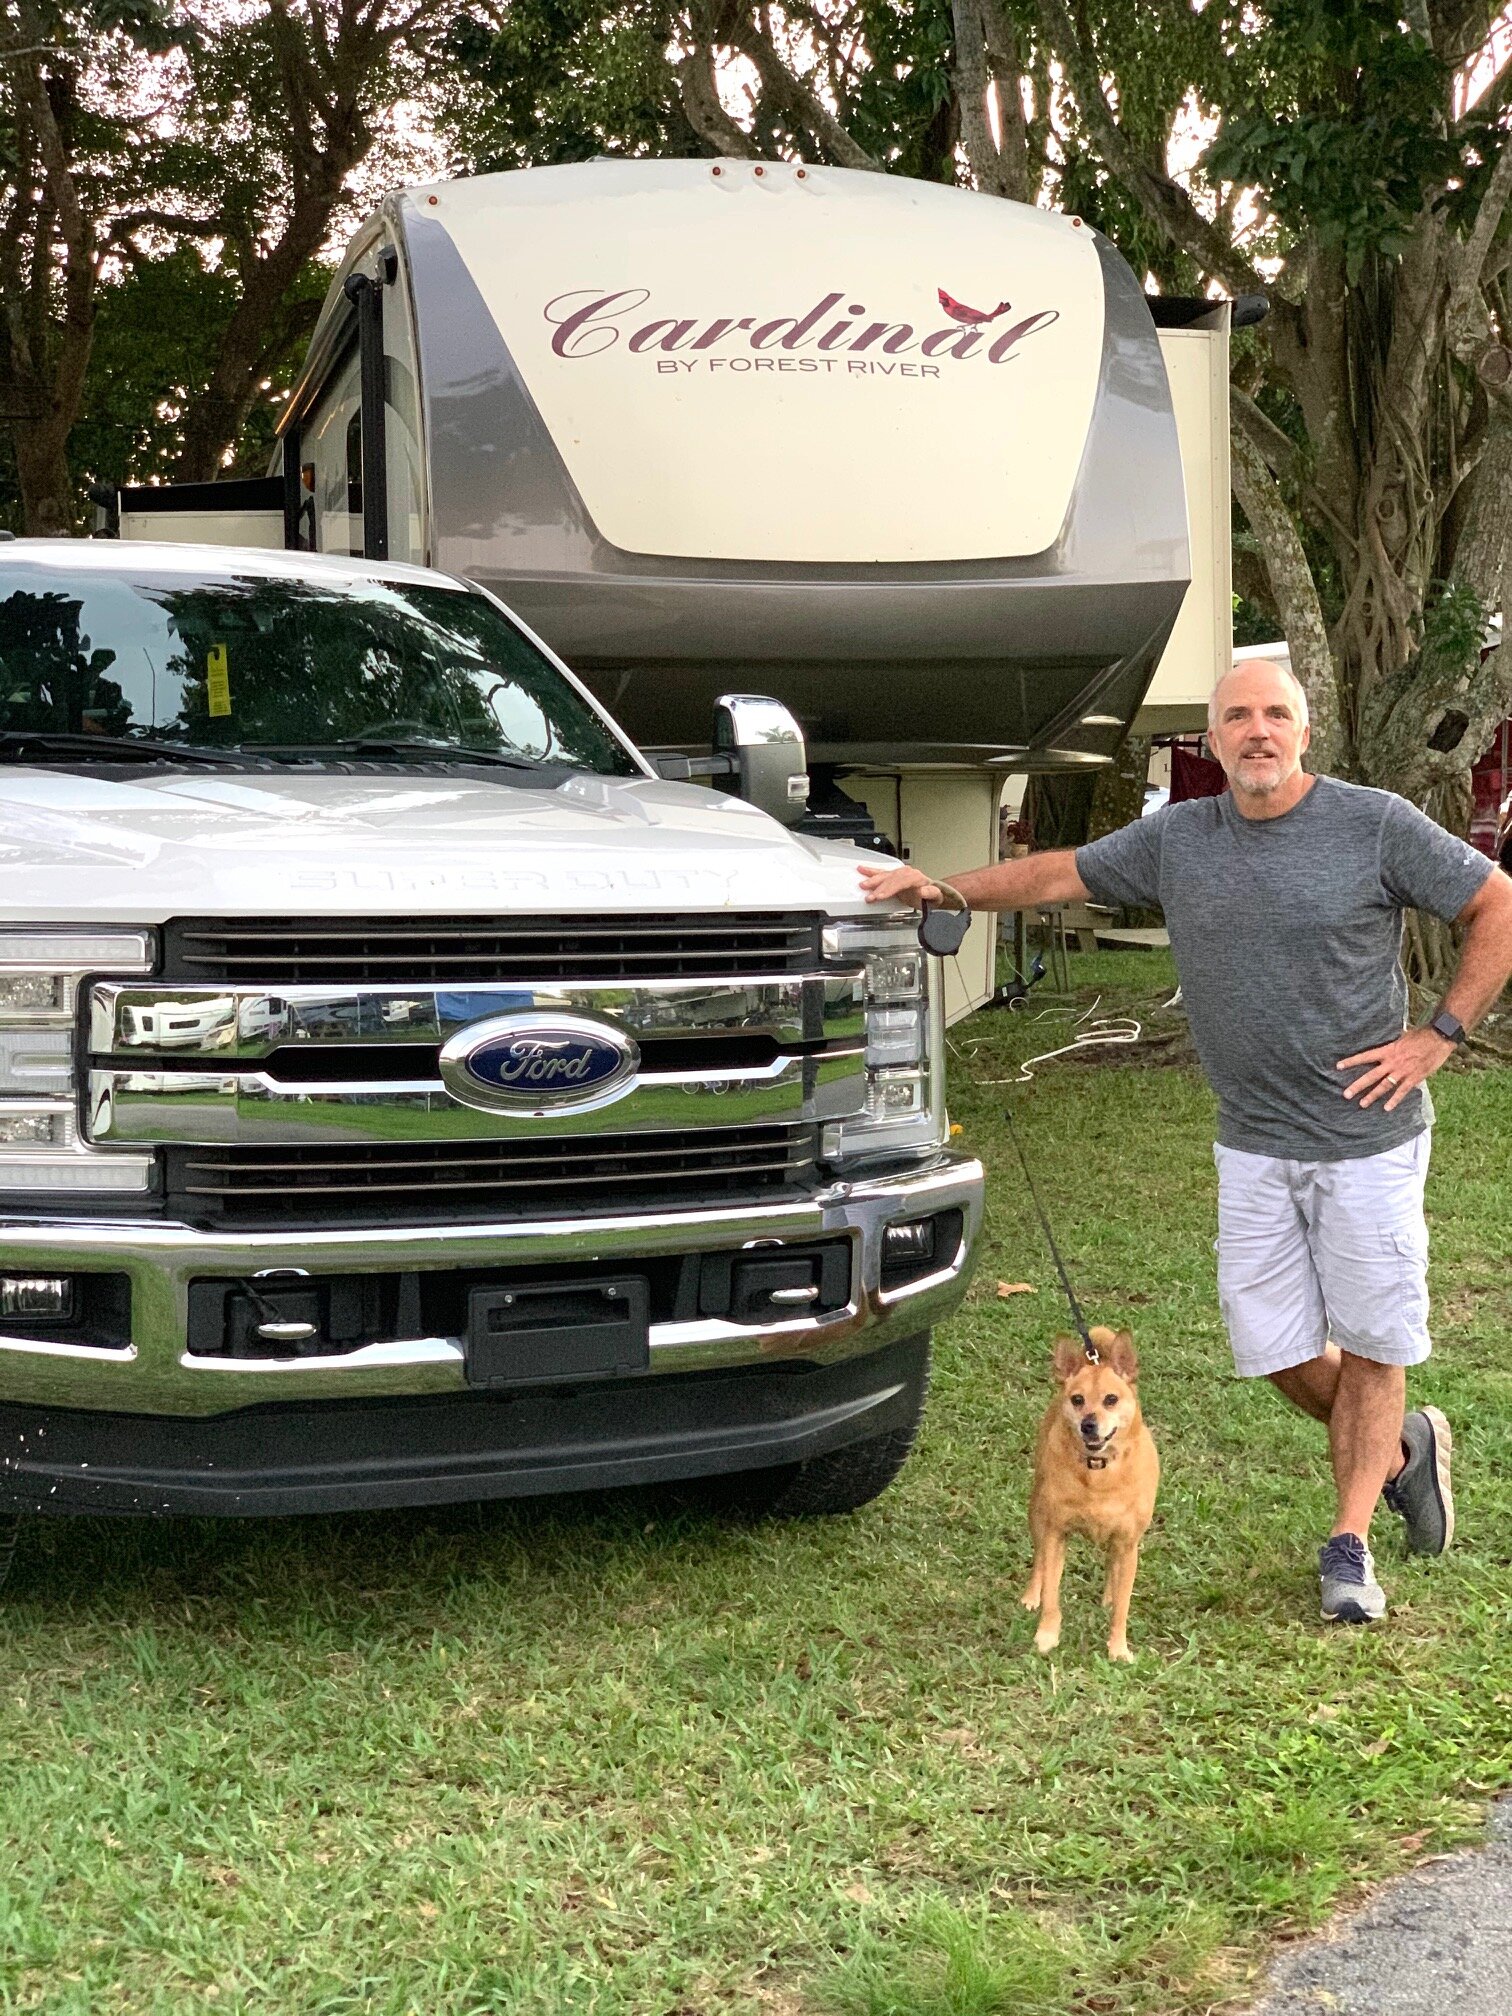  A man and his dog and his truck and his camper.  